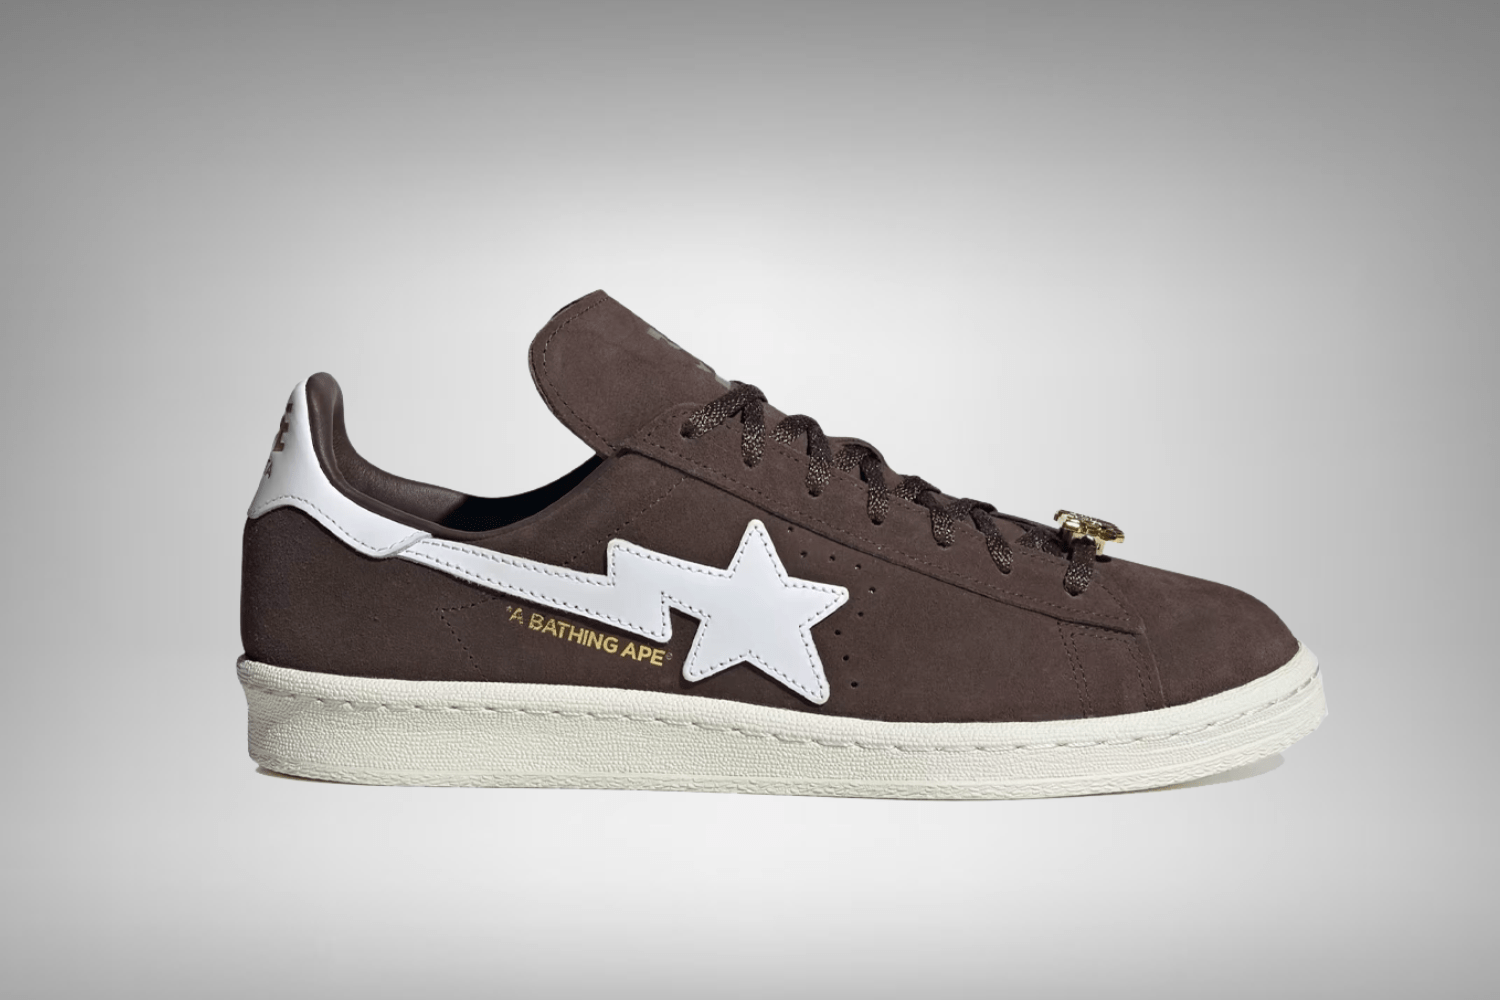 BAPE celebrates 30th anniversary with the adidas Campus 80s 'Brown'